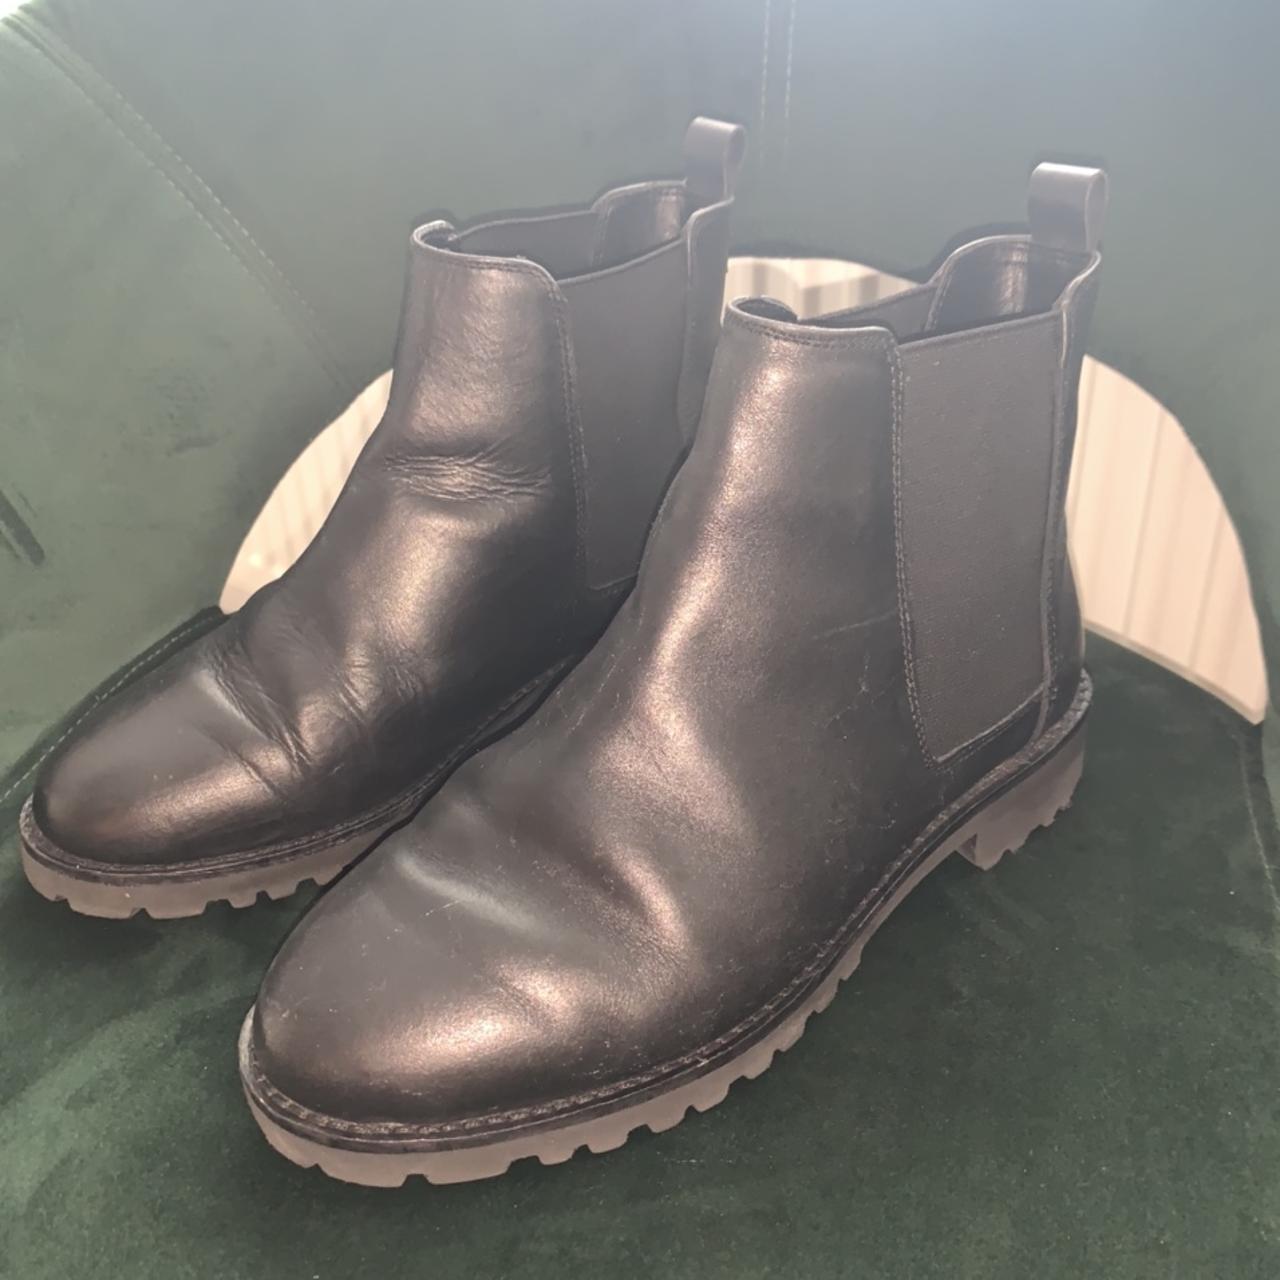 ASOS leather Chelsea boots Worn twice Size 4 Policy... - Depop